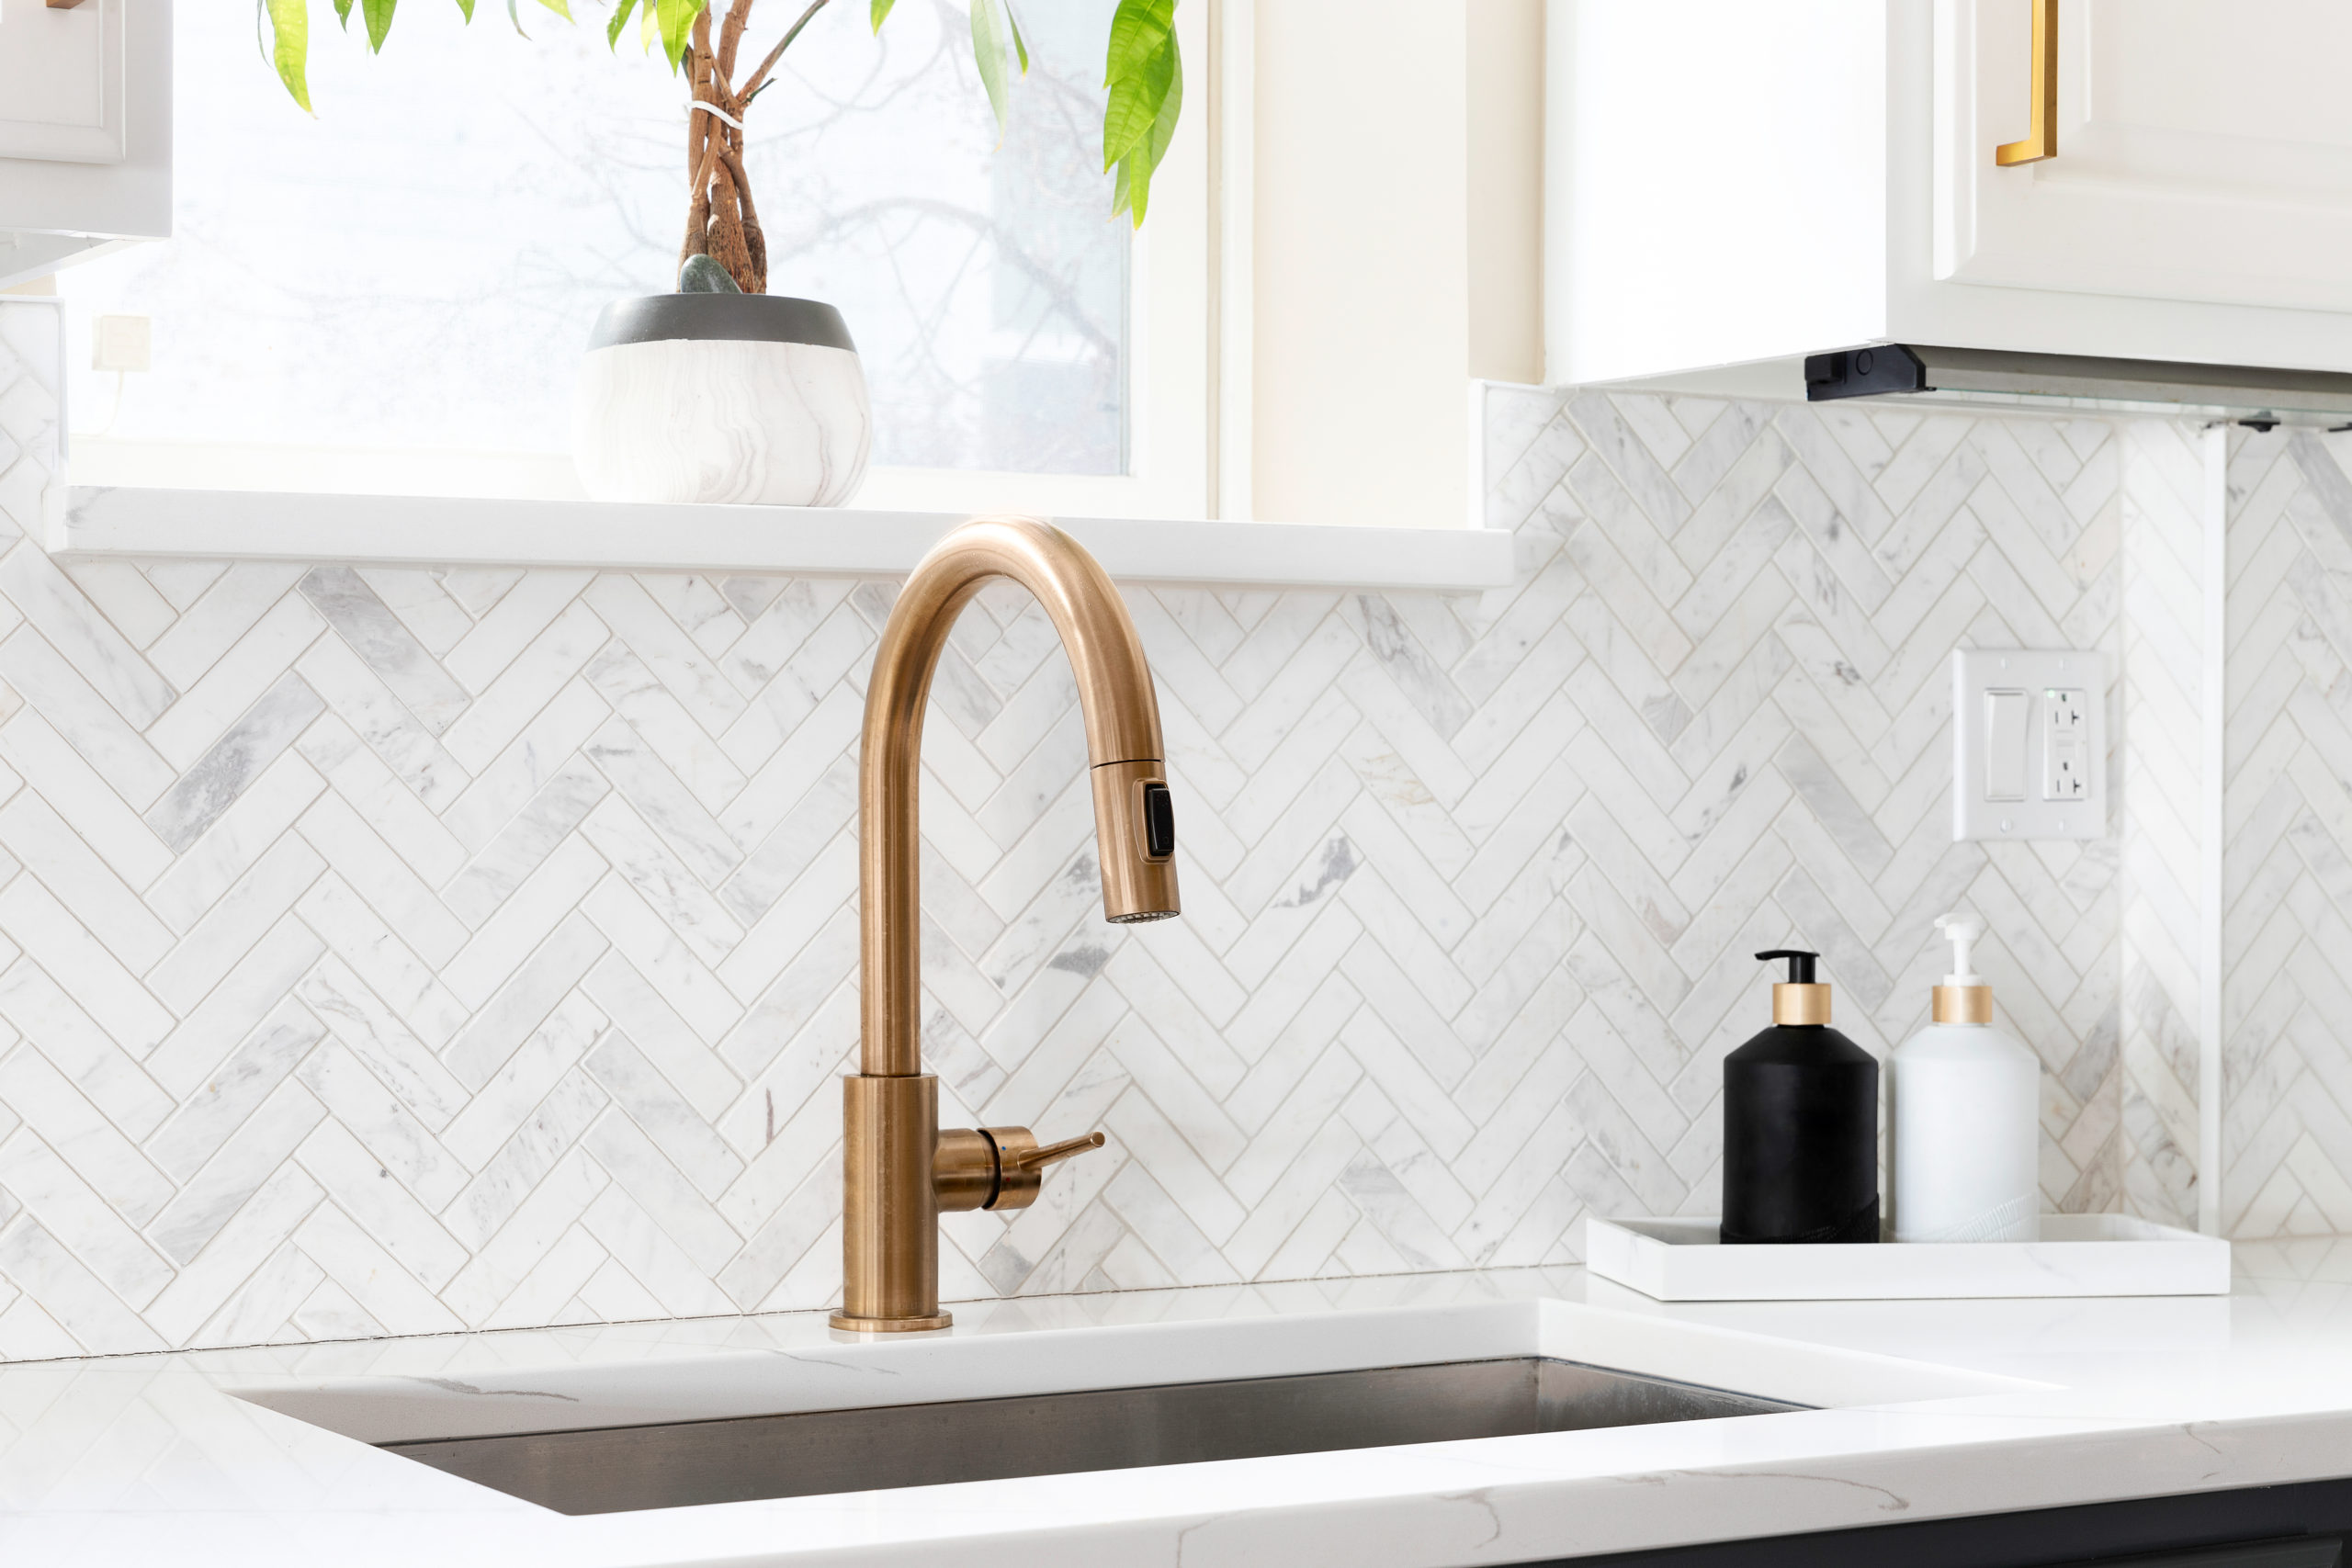 Which Kitchen Backsplash Is Right For Me